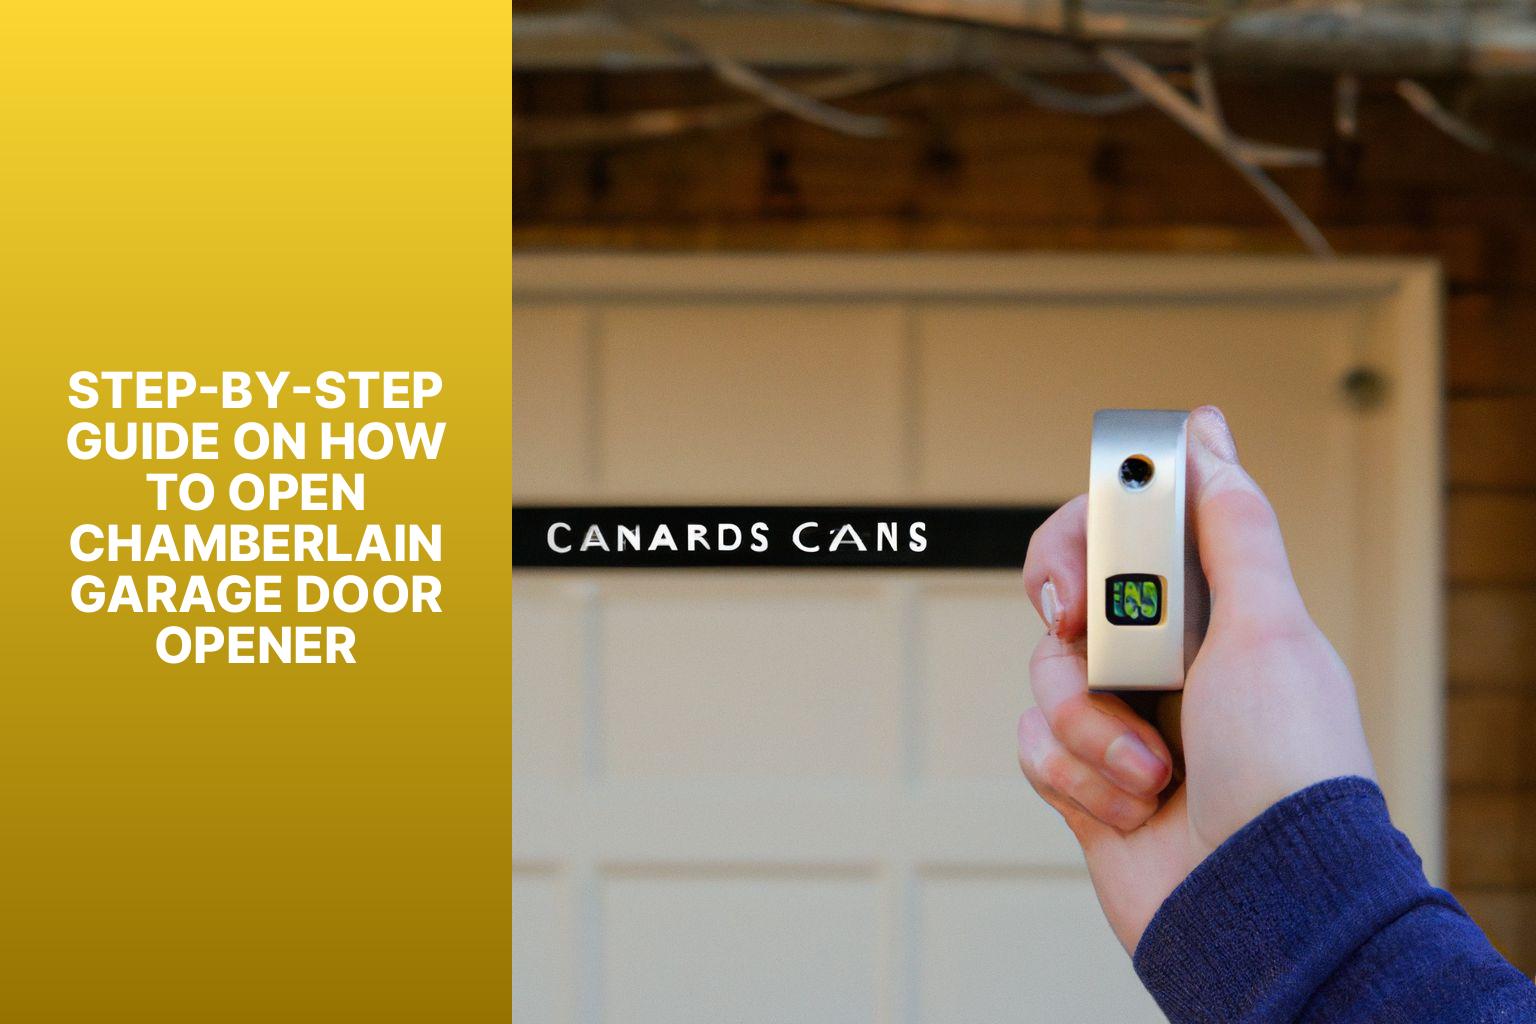 Step-by-Step Guide on How to Open Chamberlain Garage Door Opener - How to Open Chamberlain Garage Door Opener 